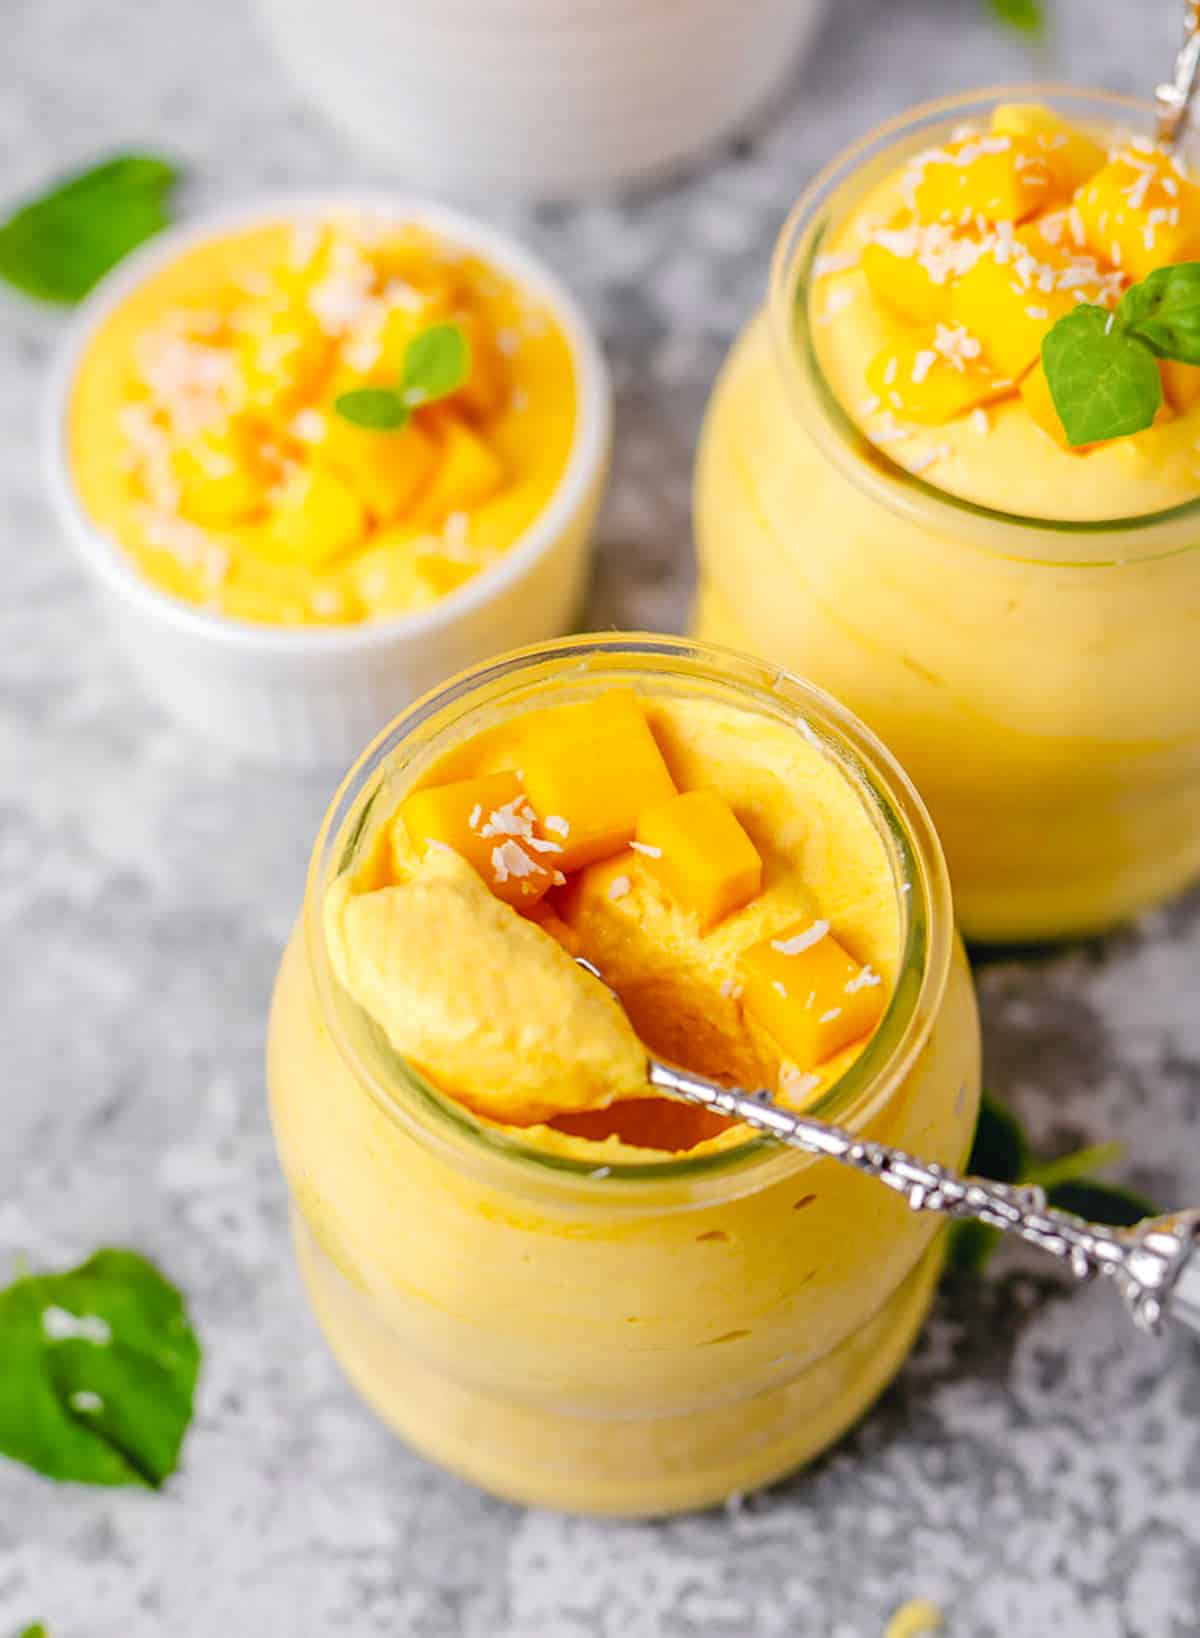 mango mousse in a glass